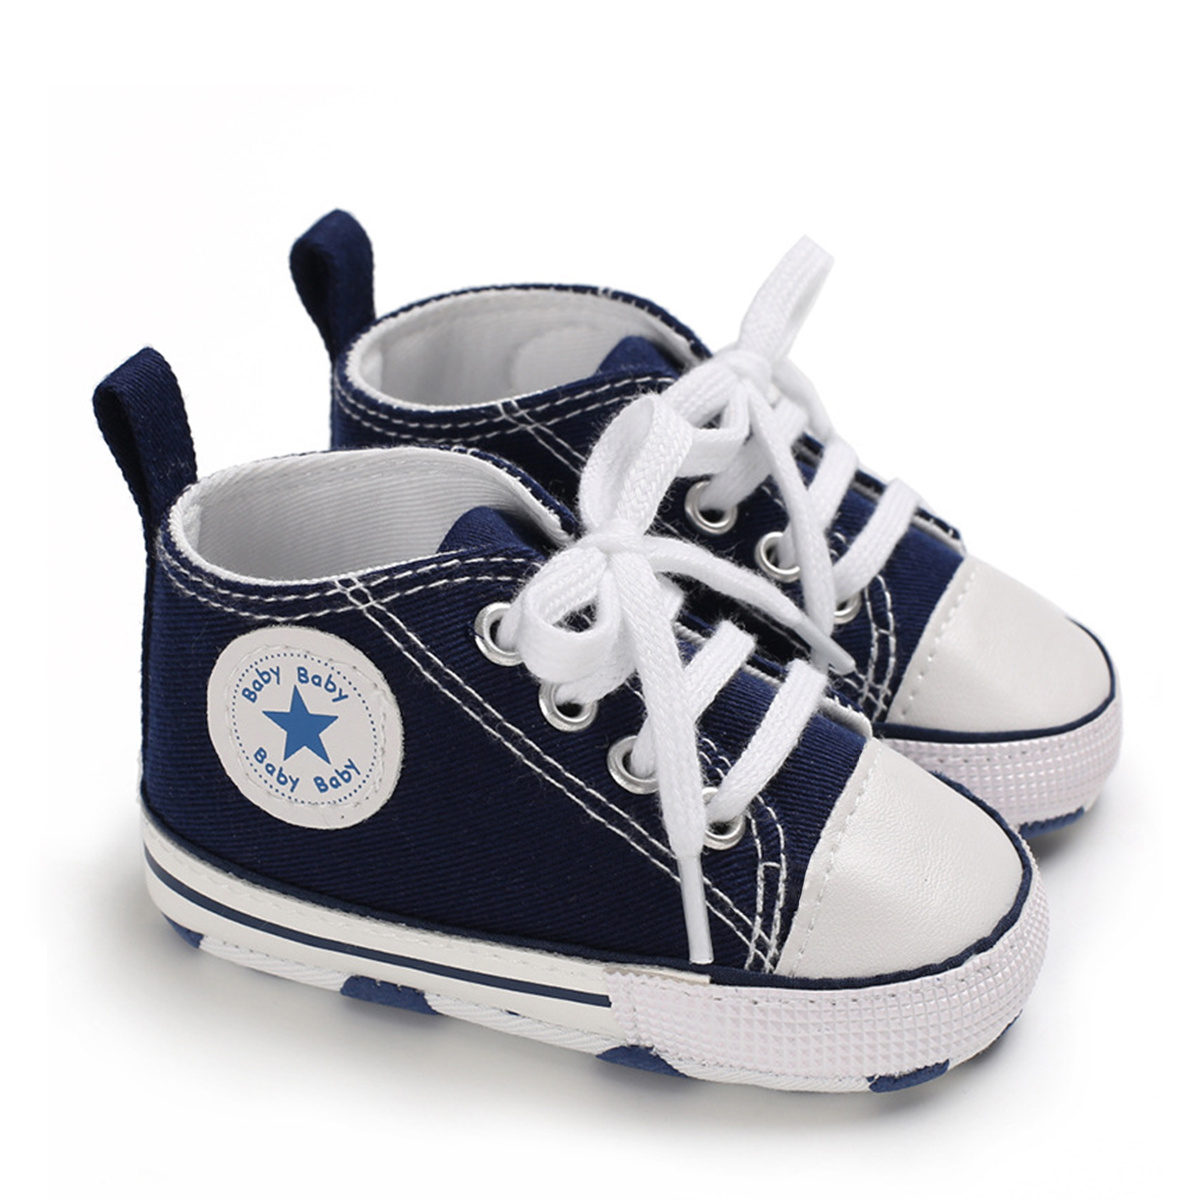 Elasticated Canvas Trainers for Babies - denim blue, Shoes